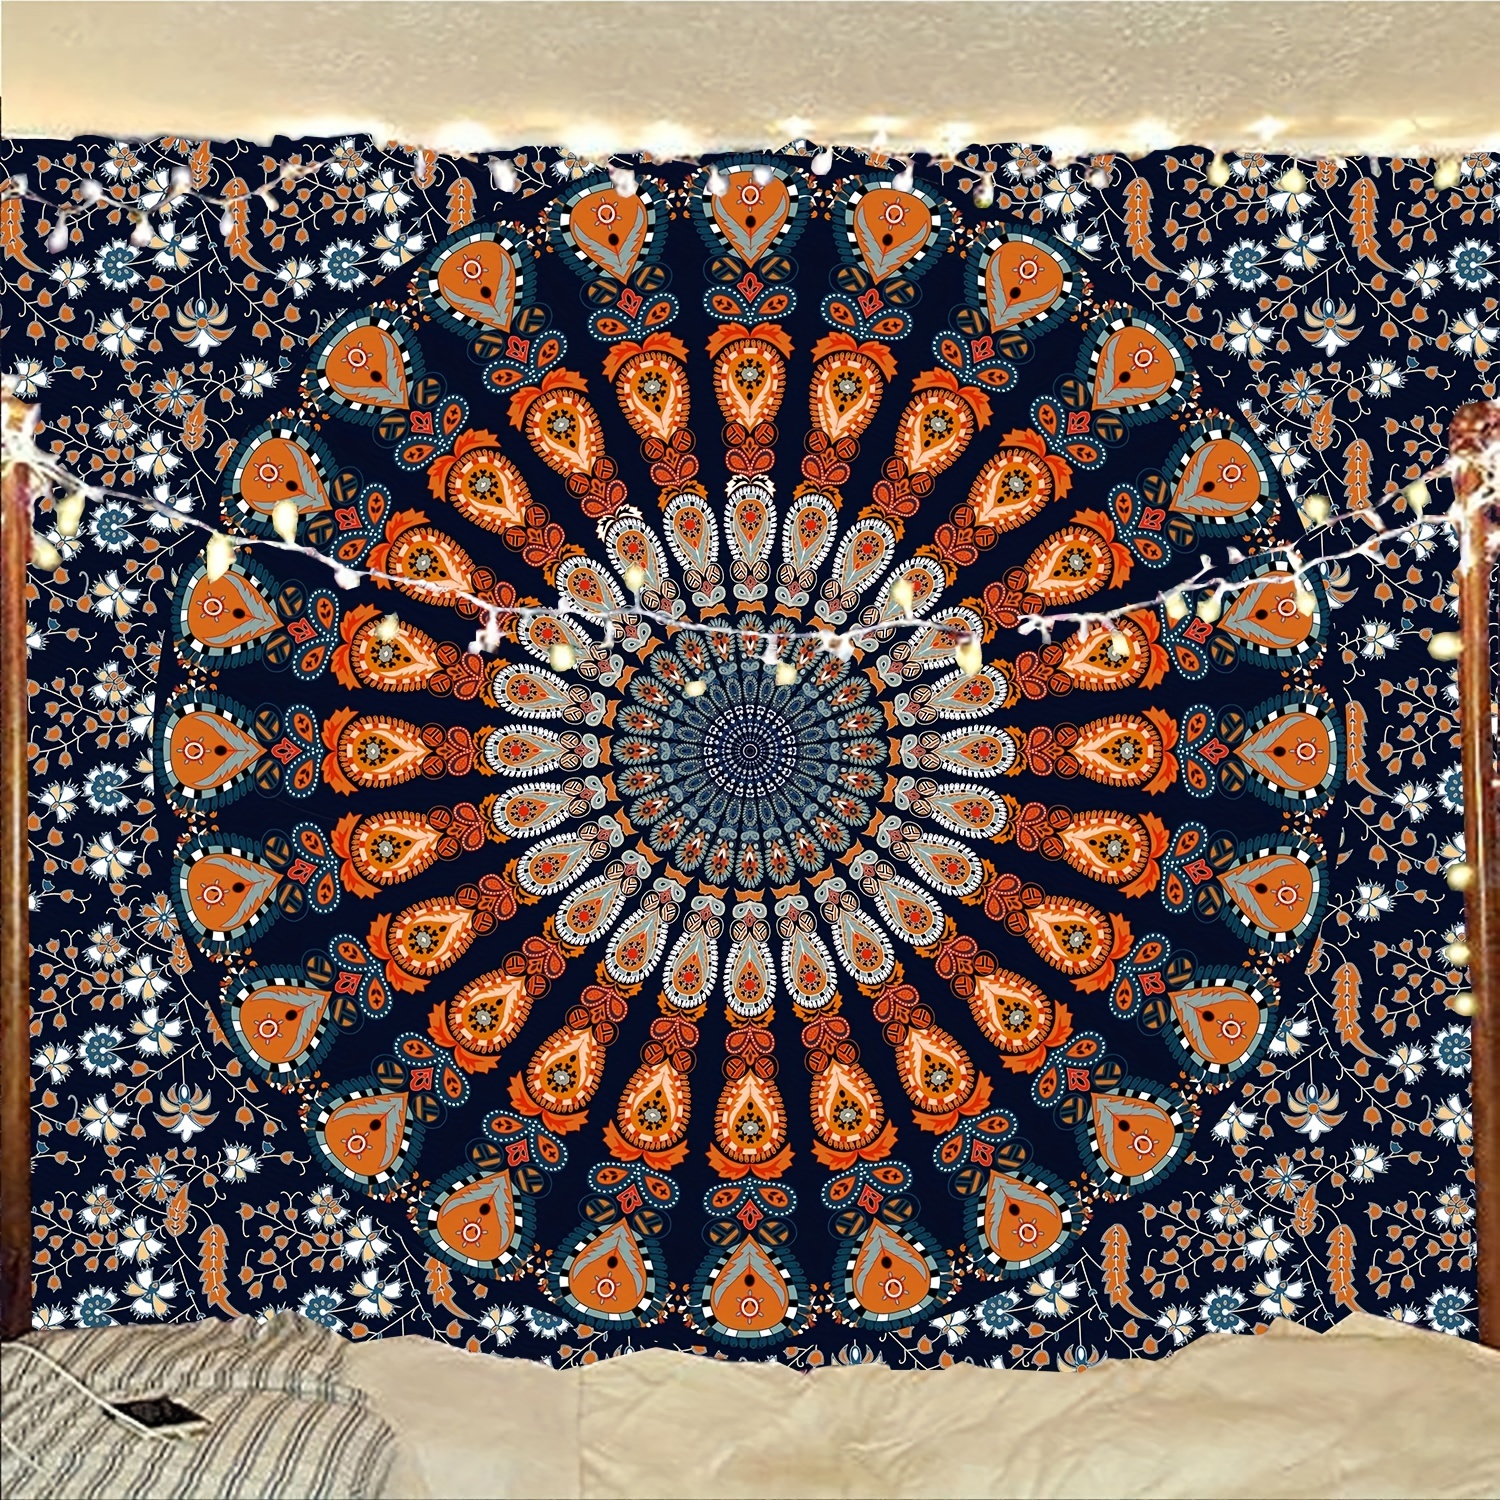 Bohemian Mandala Tapestry Hippie Tapestries Psychedelic Peacock Boho  Tapestry Wall Hanging for Bedroom(29 x 37 inches)